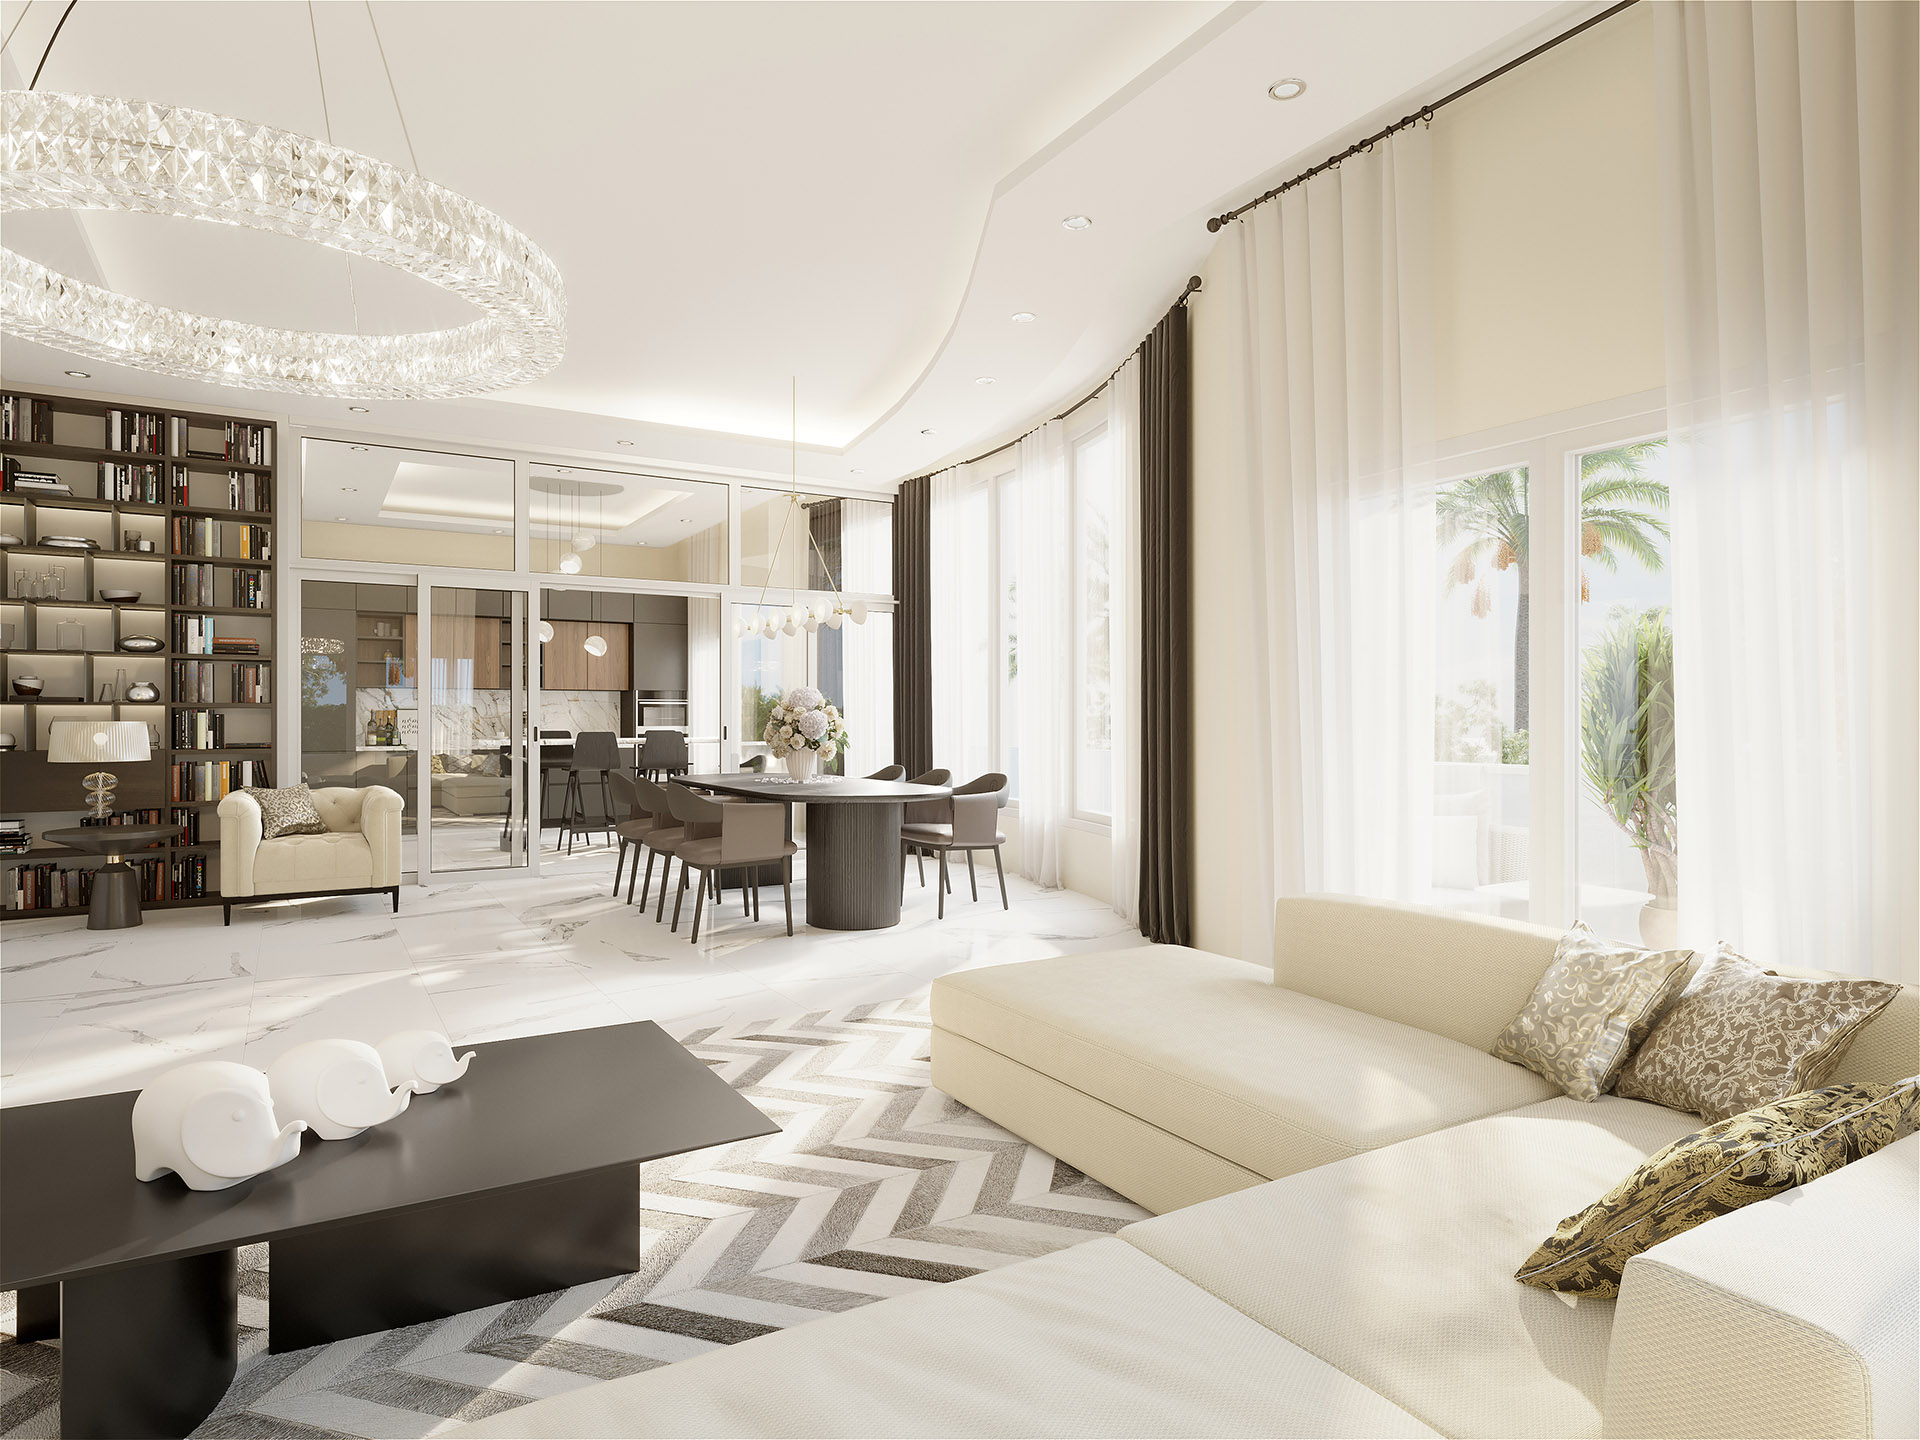 Luxurious and modern living room created by 3D computer graphics artists